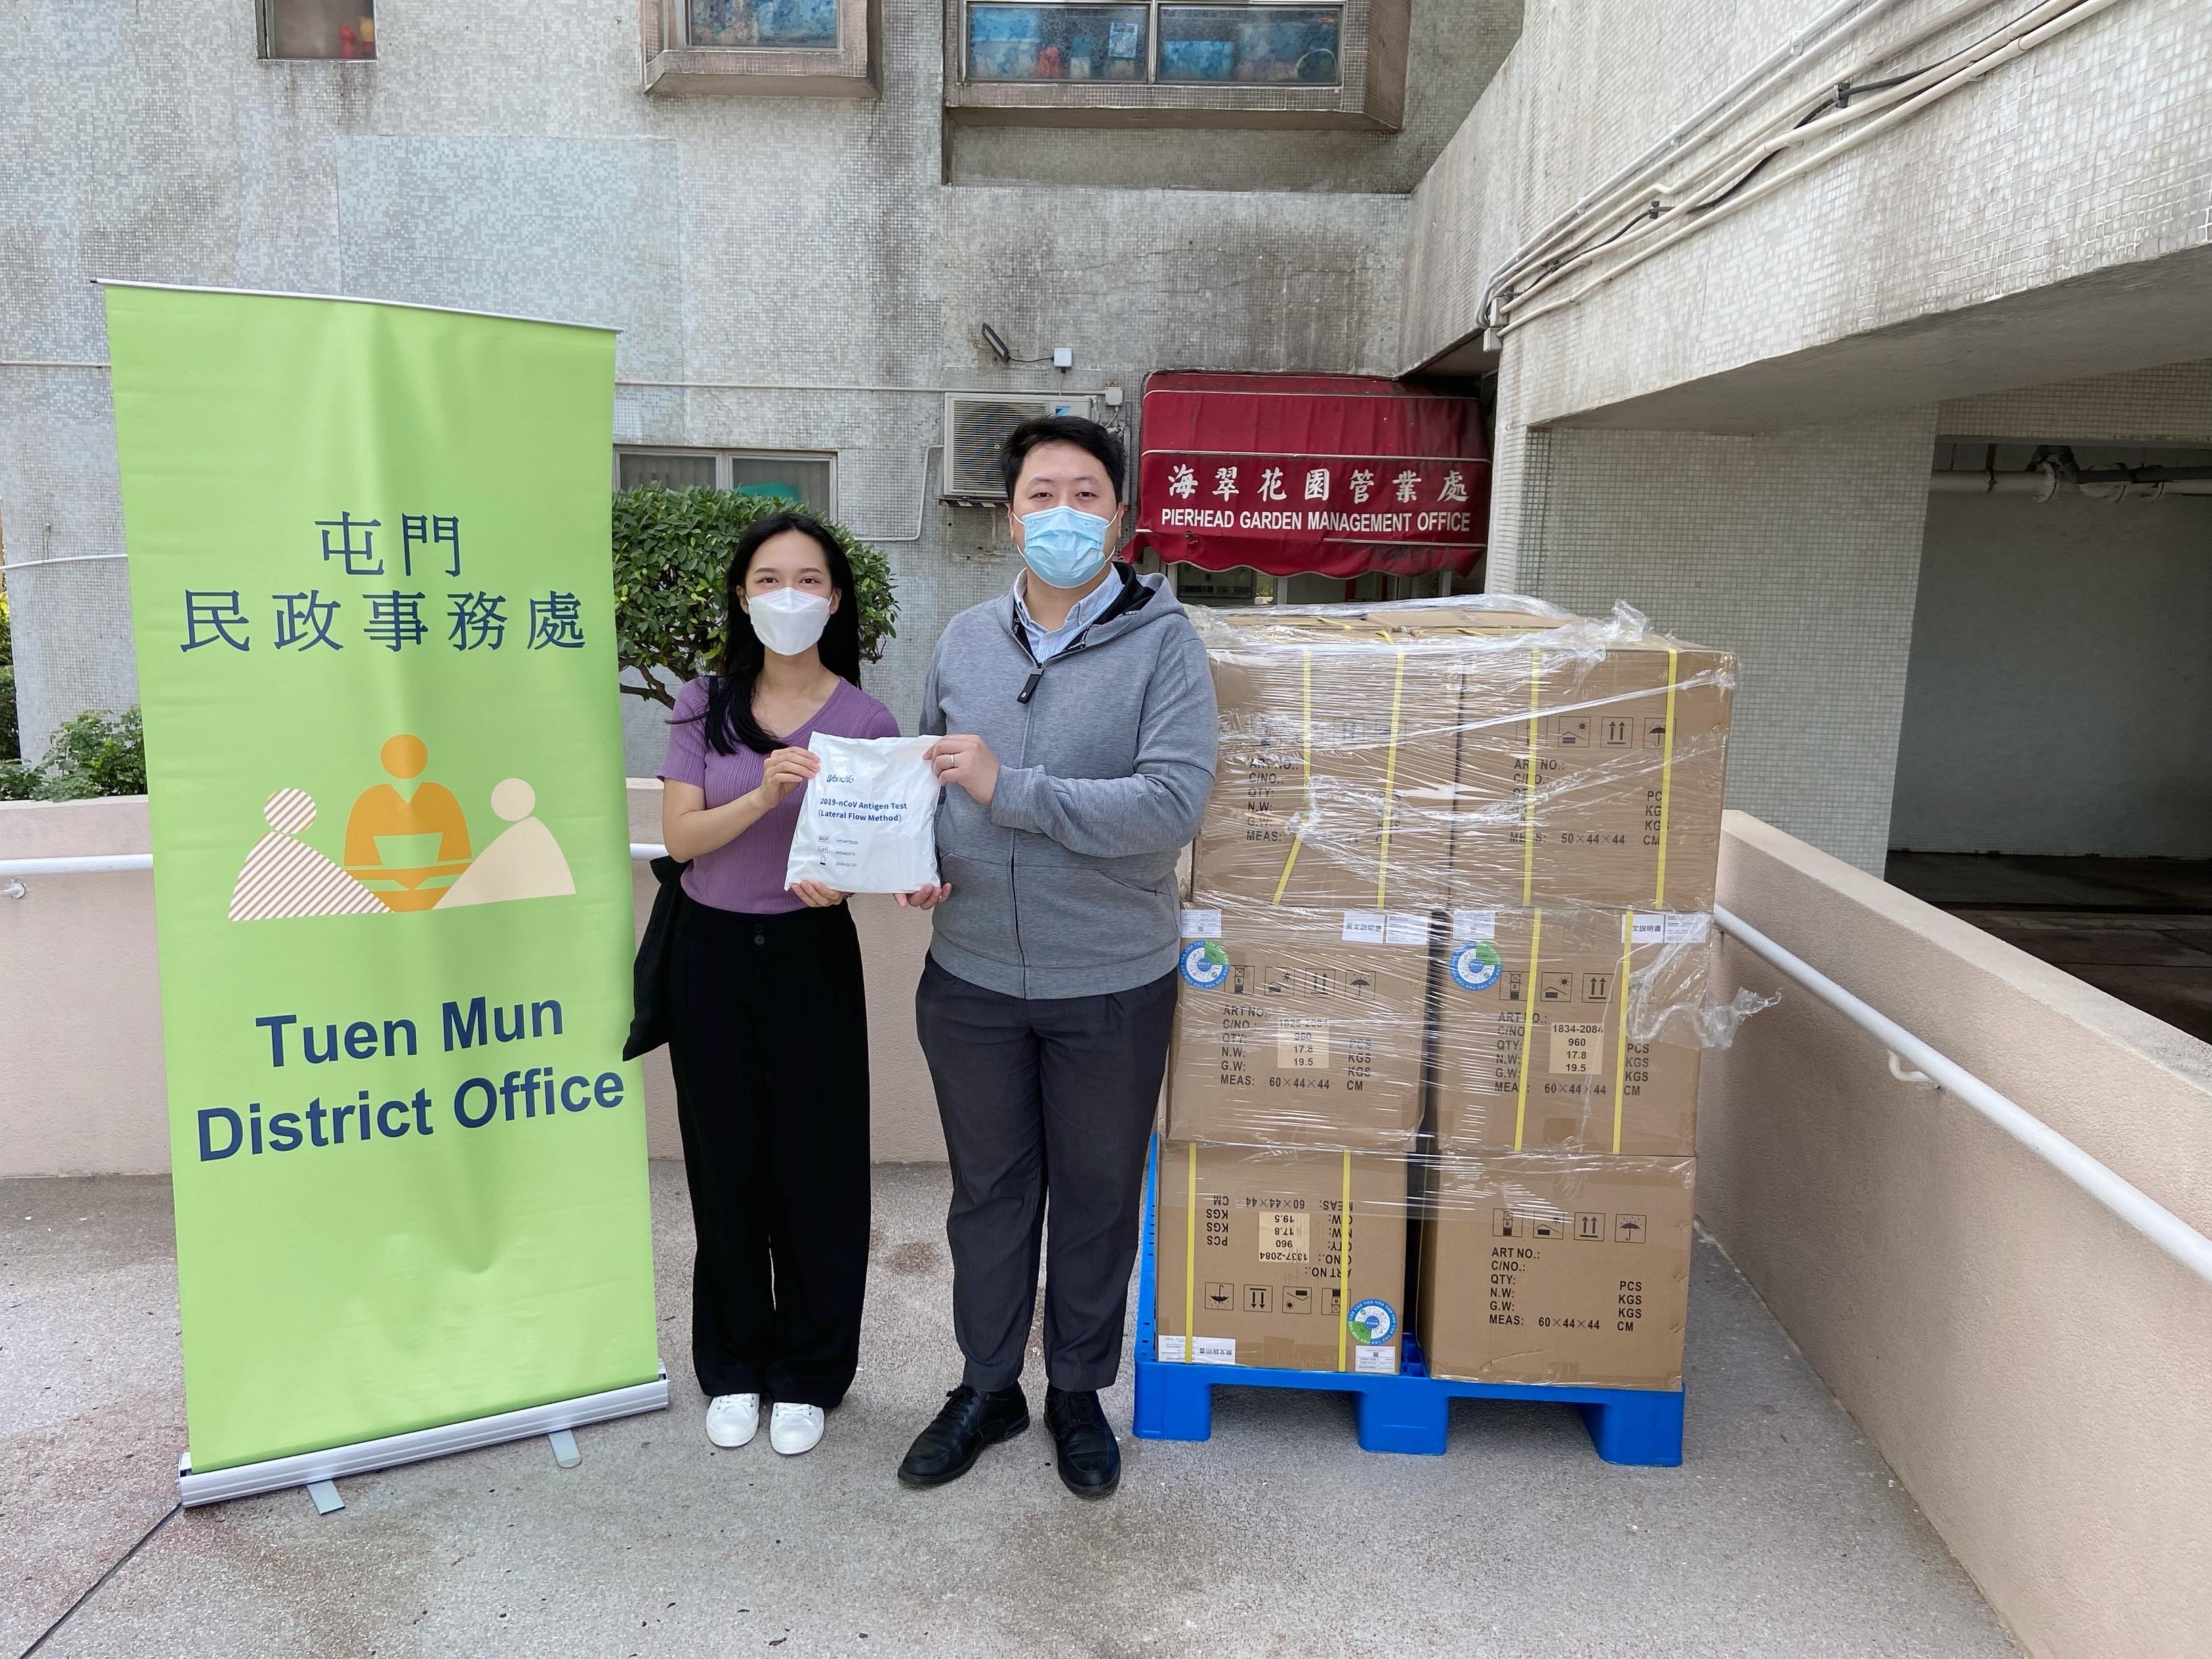 The Tuen Mun District Office today (May 6) distributed COVID-19 rapid test kits to households, cleansing workers and property management staff living and working in Pierhead Garden for voluntary testing through the property management company.